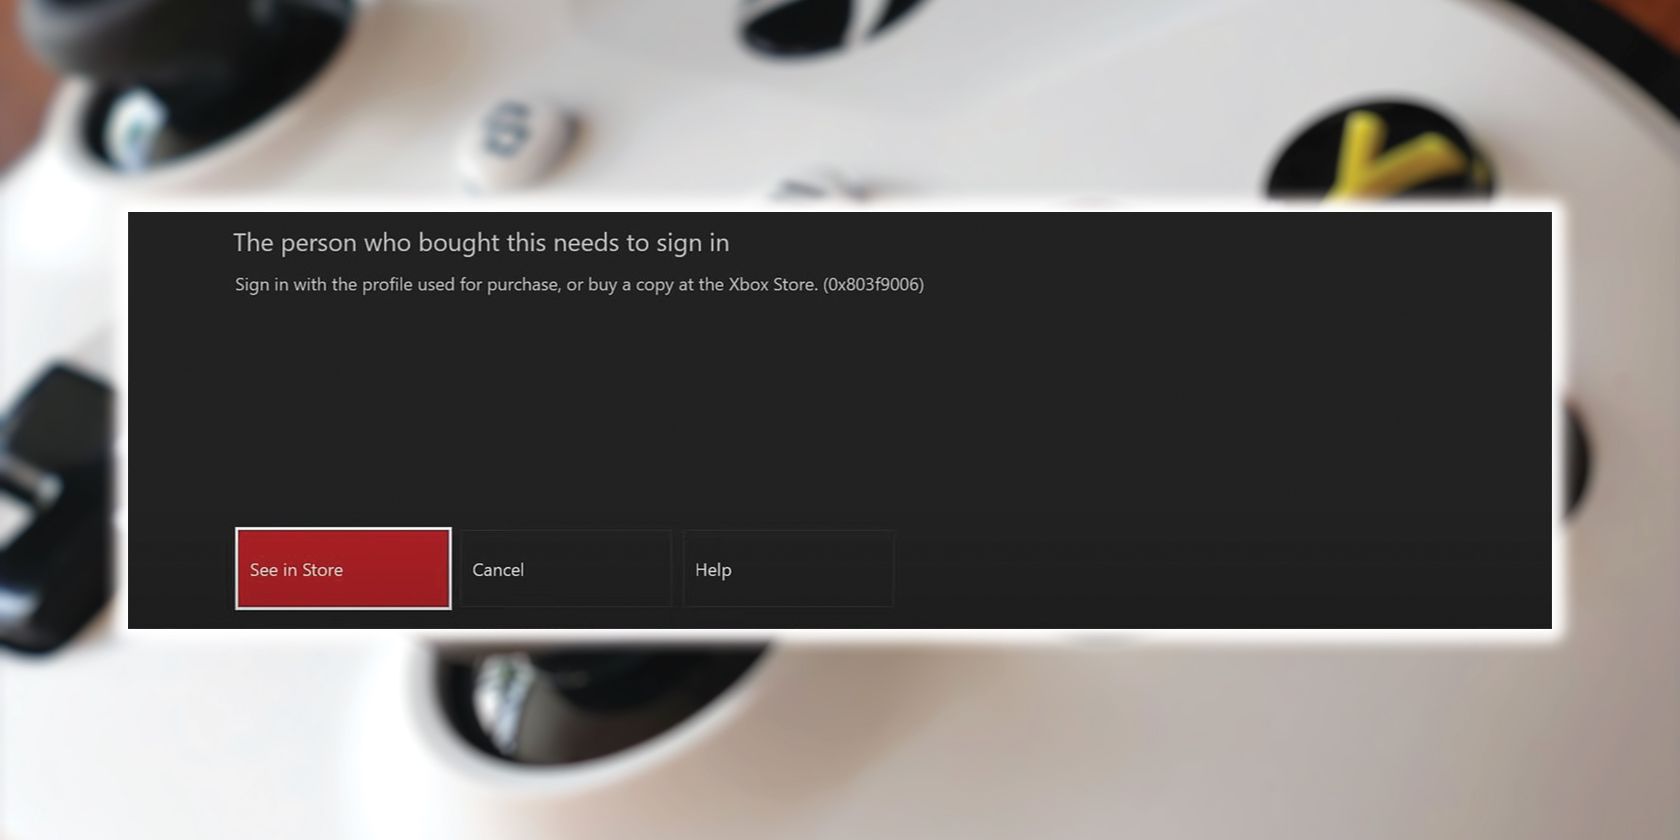 How to Repair the Xbox Error “the Person Who Bought This Needs to Sign In”